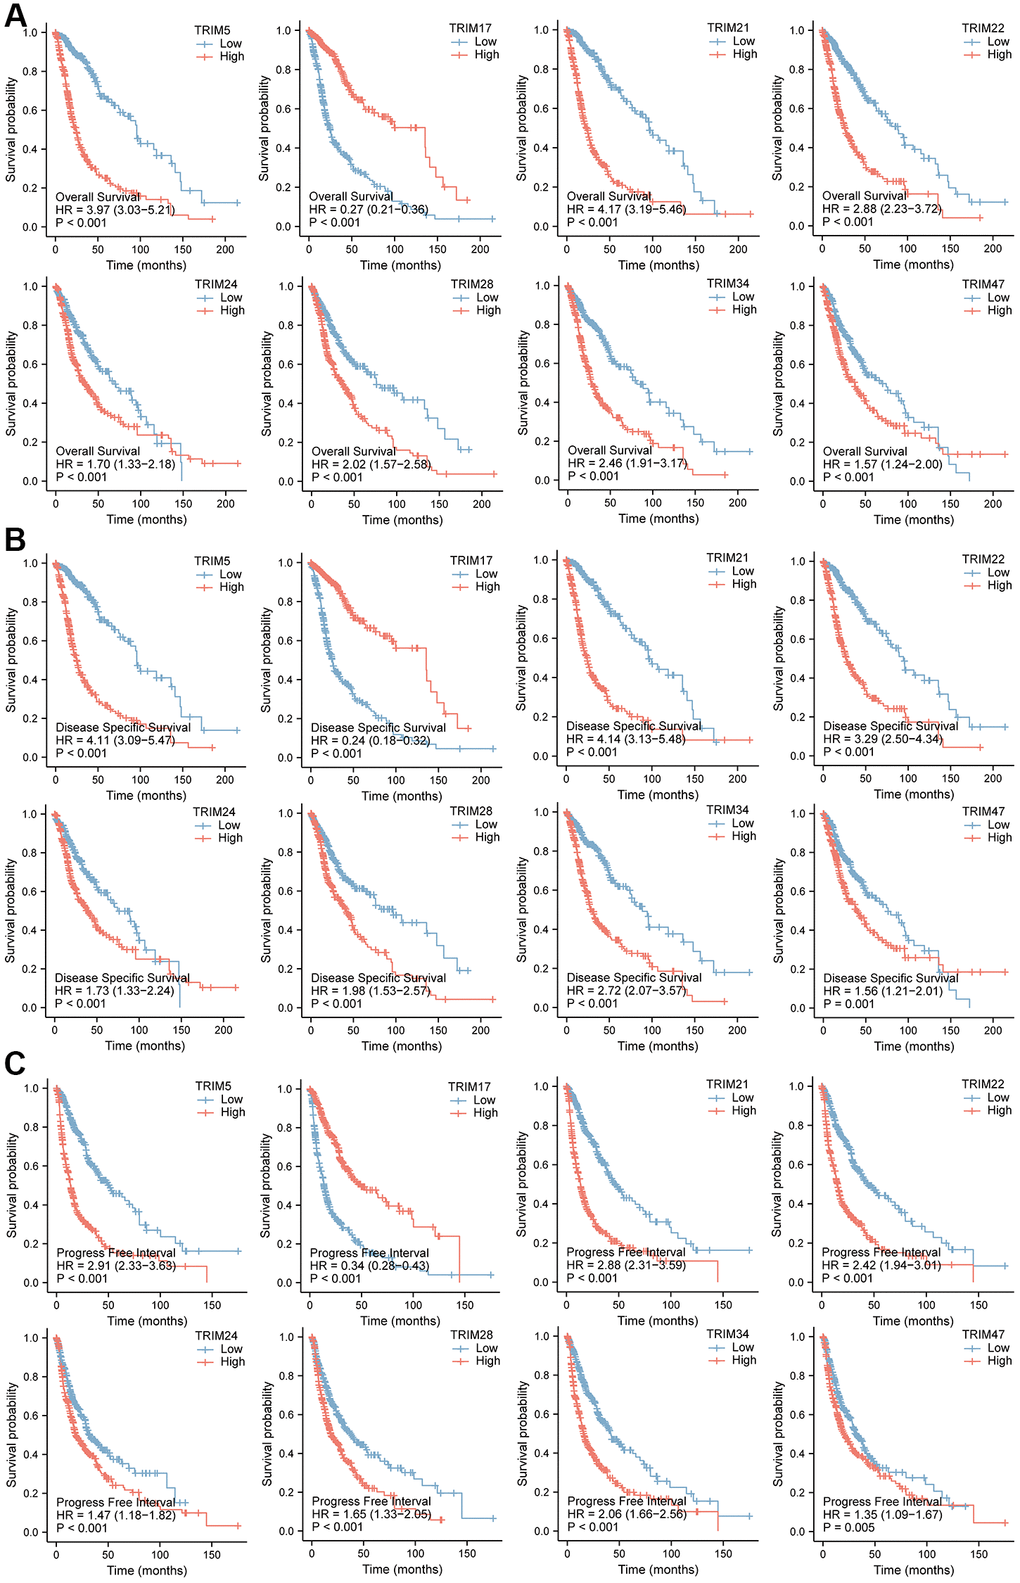 Prognostic feature of mRNA expression of distinct TRIM family members in glioma patients. The OS, DSS, and PFI survival curves comparing patients with high and low TRIM family member expression in gliomas are shown (A–C). Abbreviations: OS: overall survival; DSS: disease-specific survival; PFI: progress-free interval.